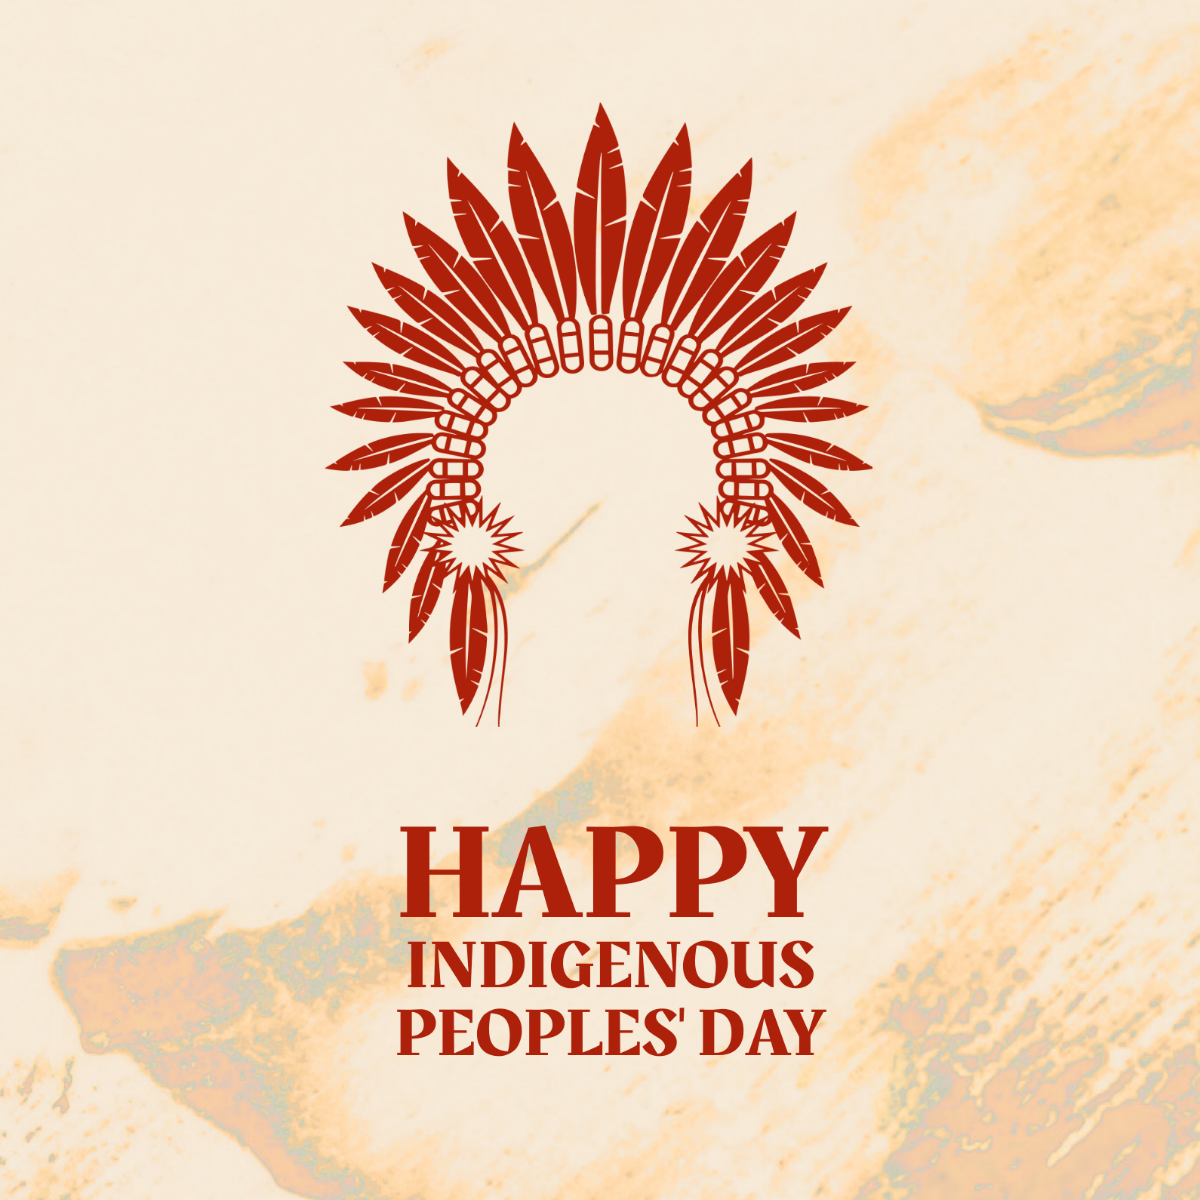 Indigenous Peoples' Day LinkedIn Post